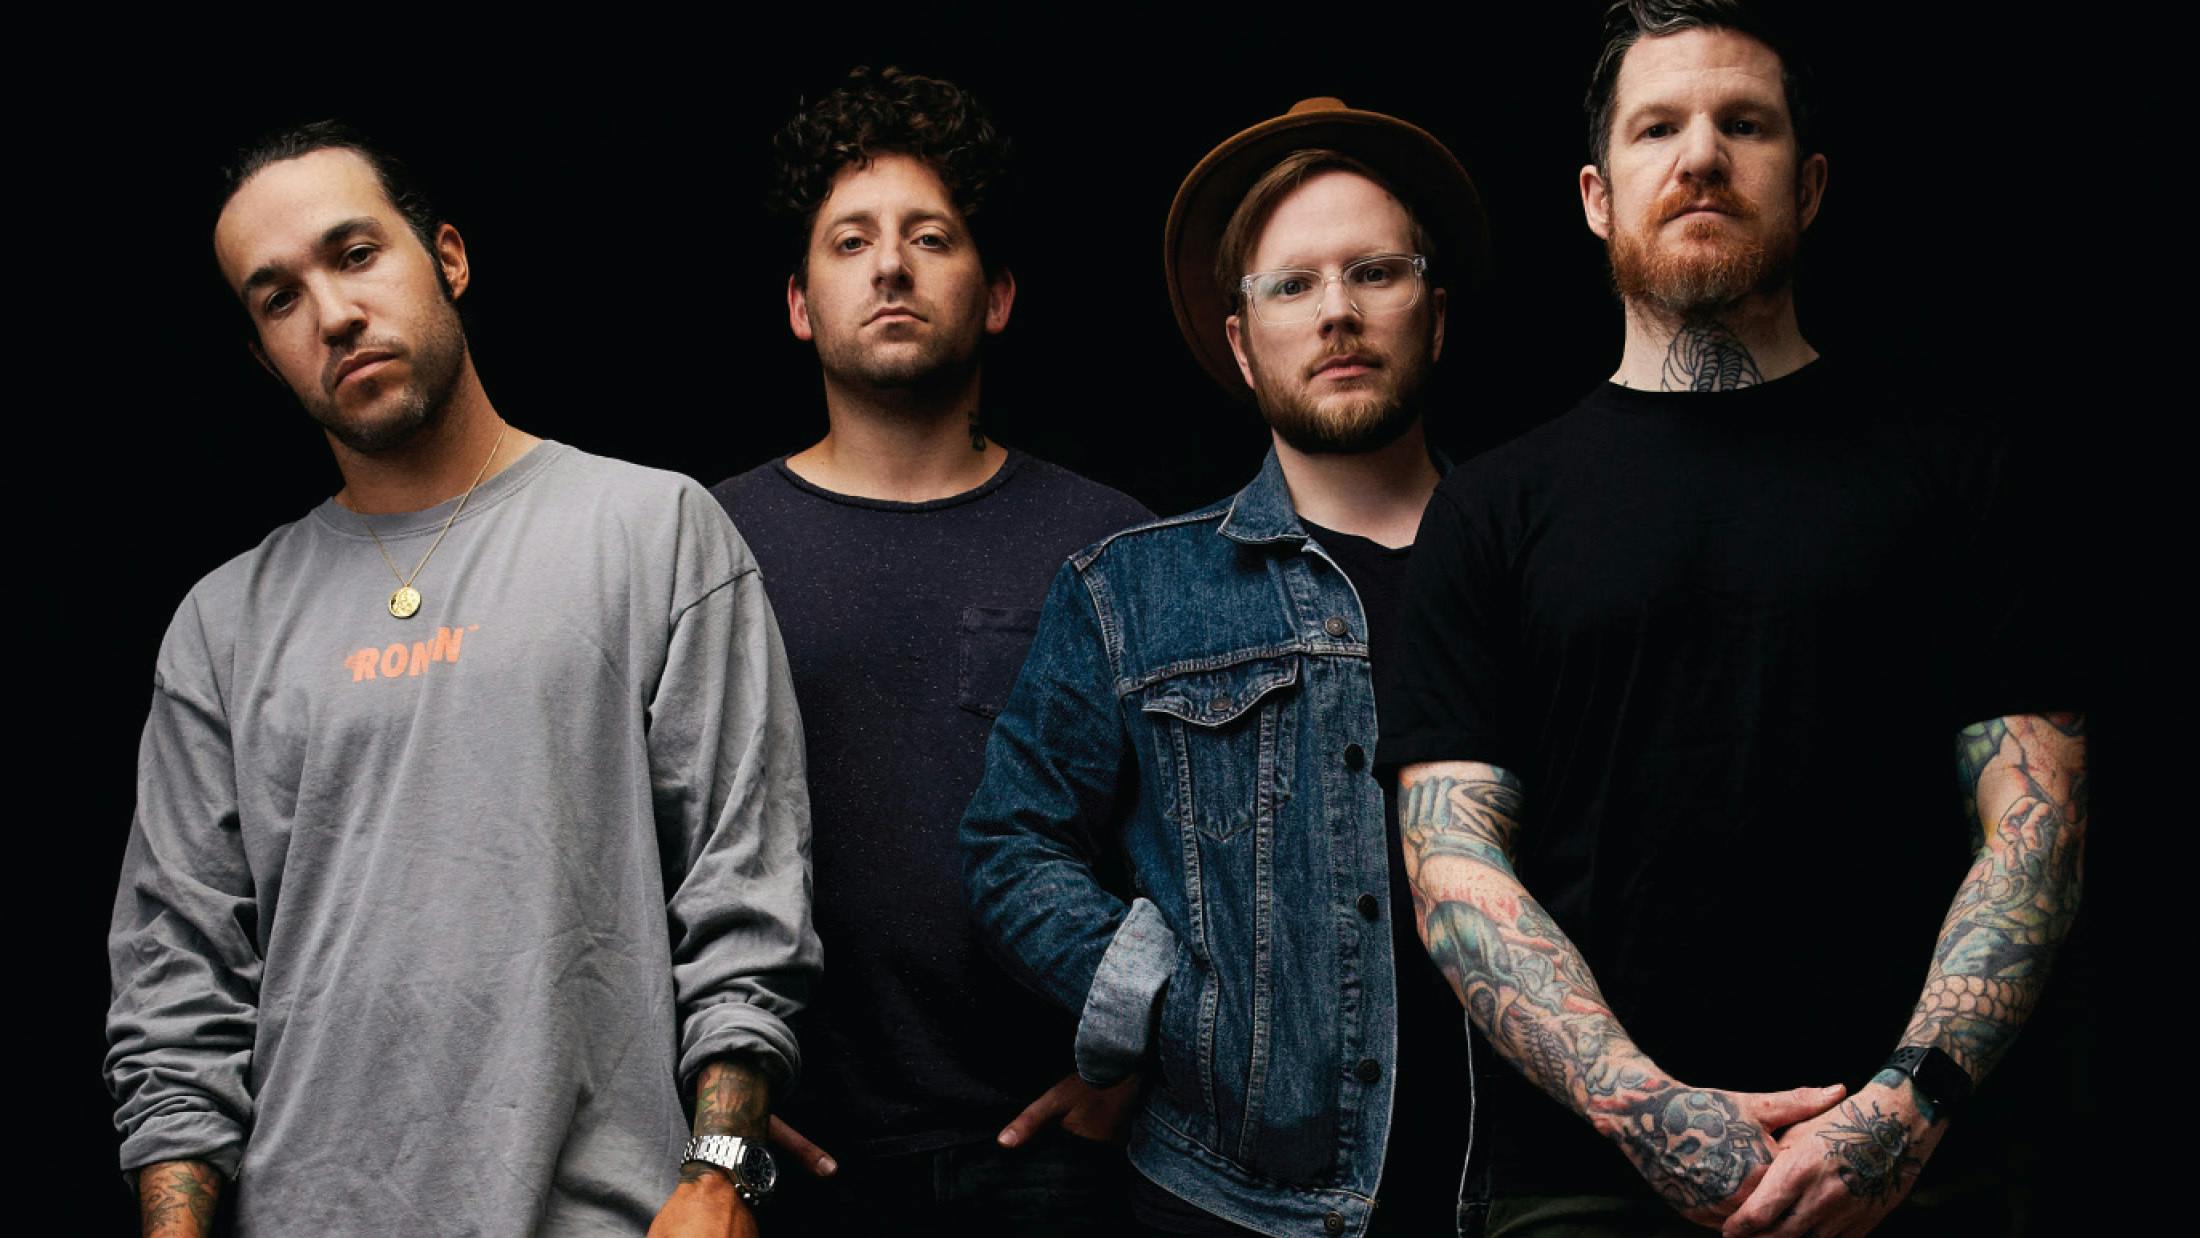 Fall Out Boy on the headspace of their new album: “It has to be for a purpose”